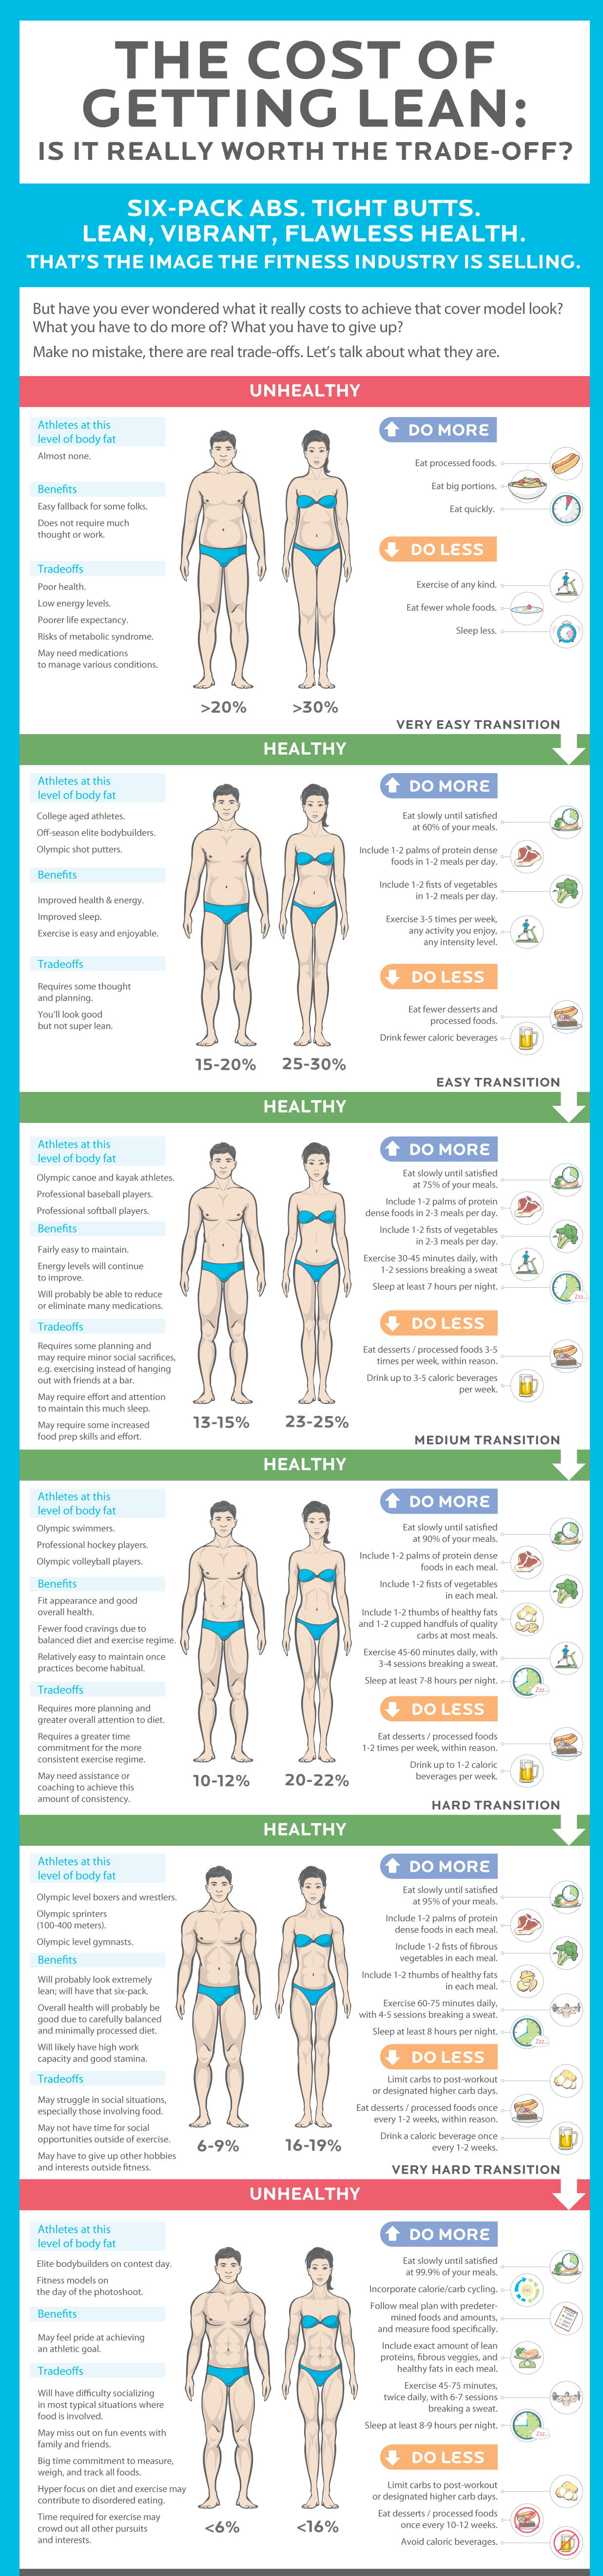 How To Visually Estimate Your Body Fat Percentage - BuiltLean